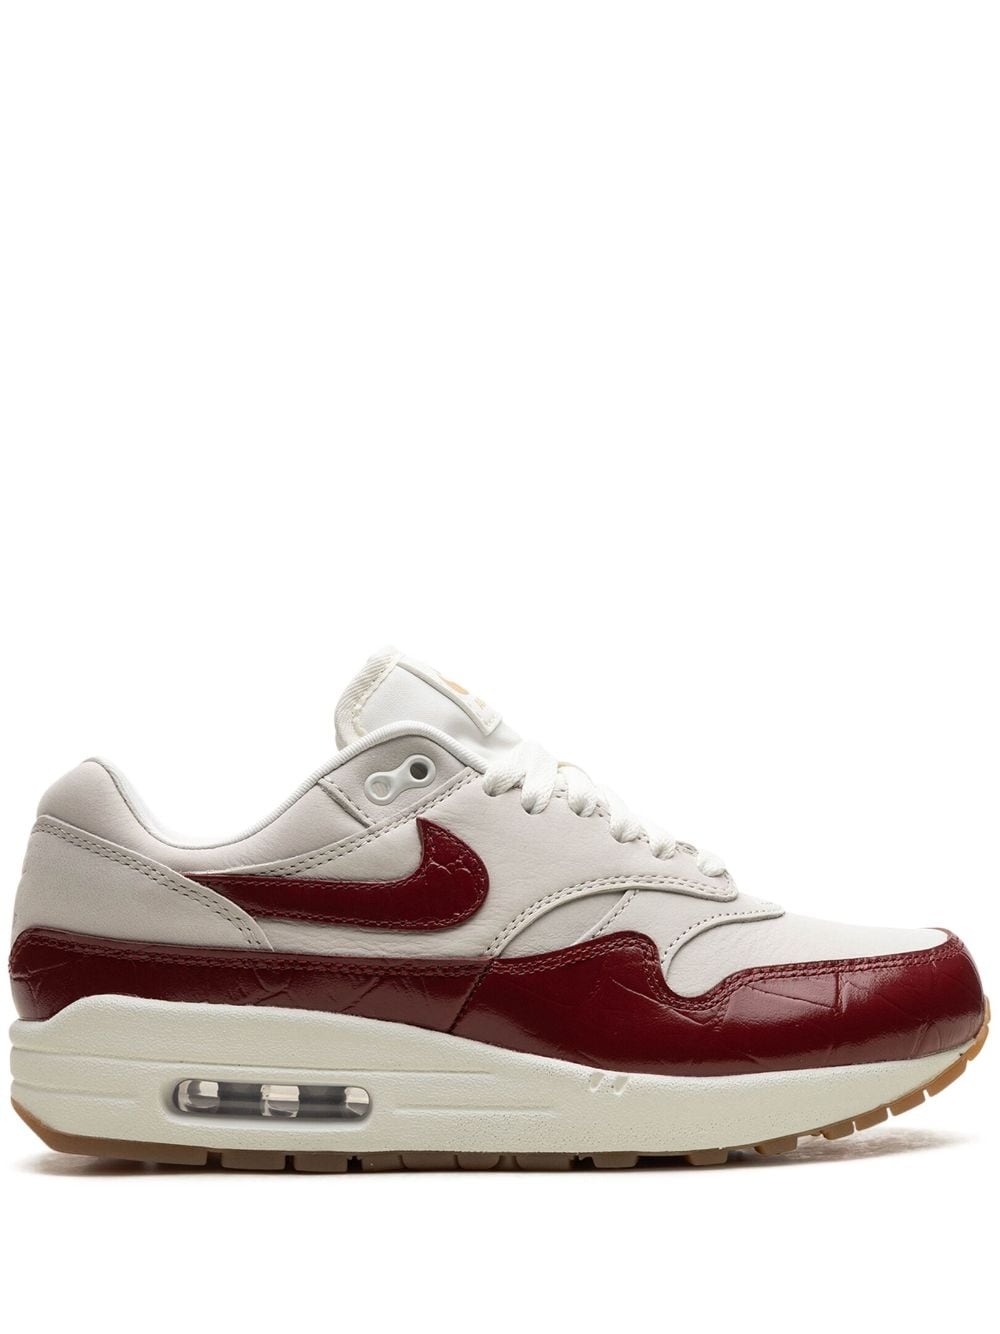 Air Max 1 LX "Team Red" sneakers - 1